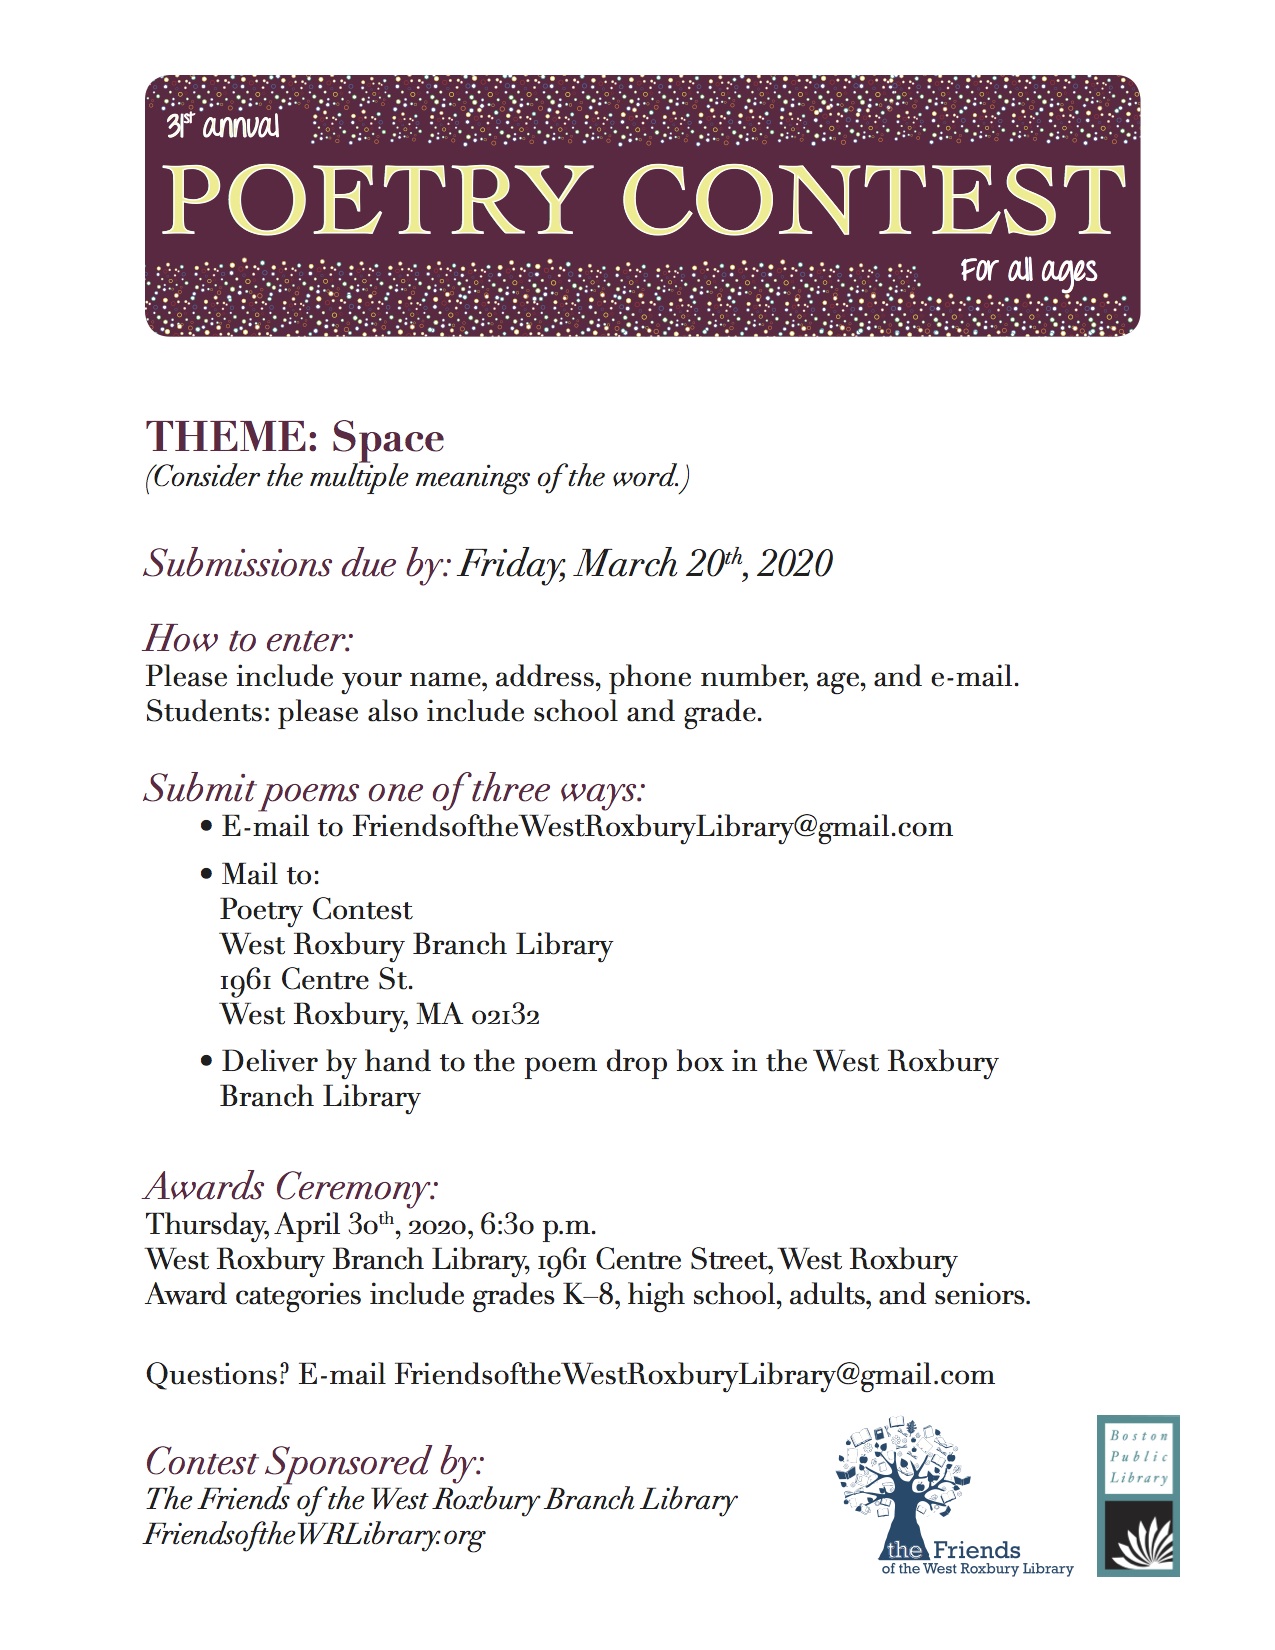 31st Annual Poetry Contest for All Ages Friends of the West Roxbury